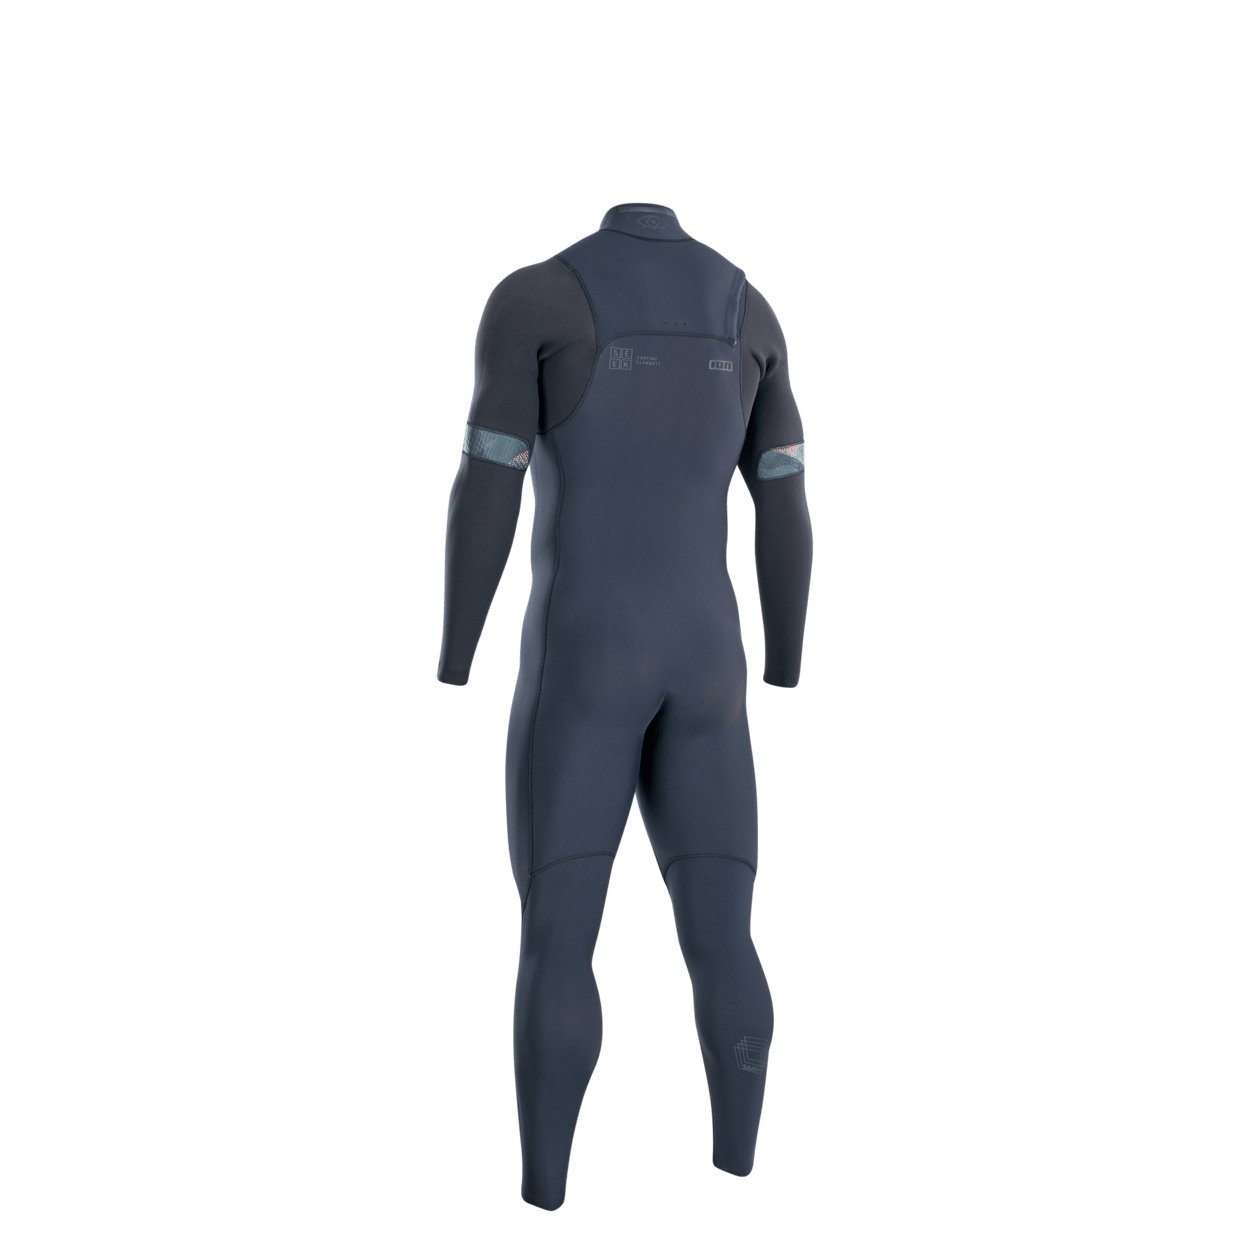 ION Seek Amp 4/3 Front Zip 2022 - Worthing Watersports - 9010583056074 - Wetsuits - ION Water